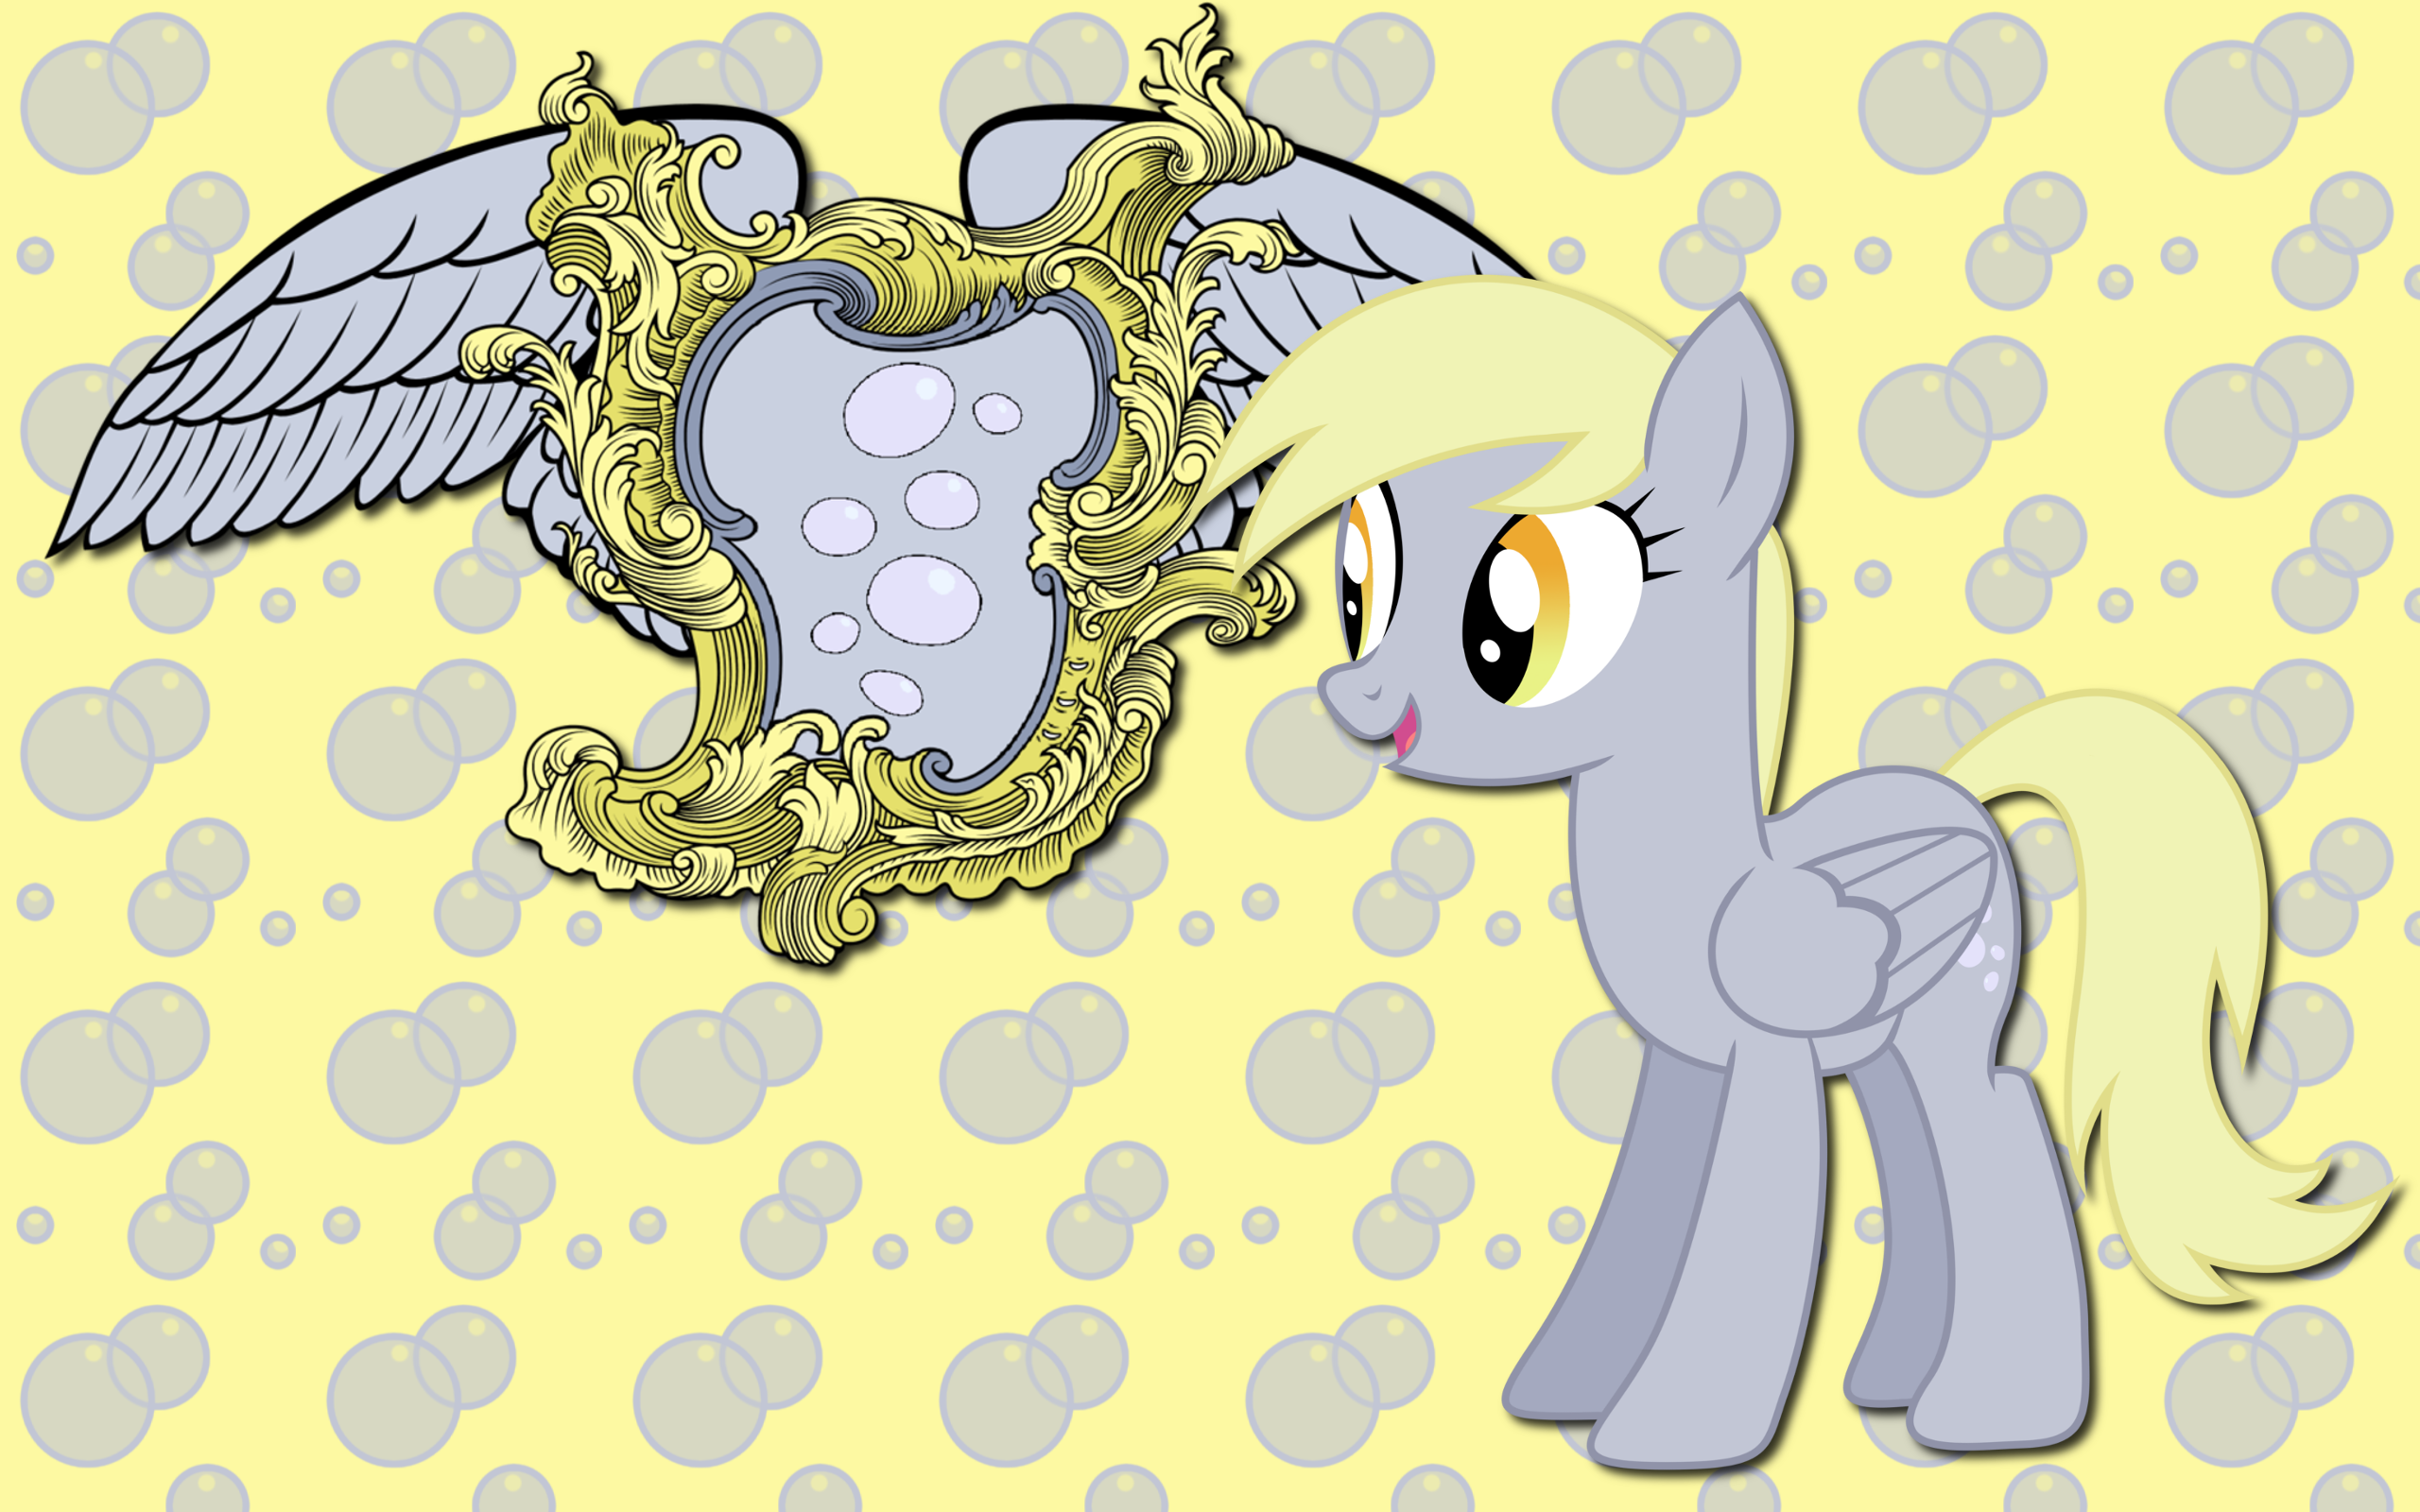 Derpy Hooves CoA WP by AliceHumanSacrifice0, Kooner-cz and Lord-Giampietro